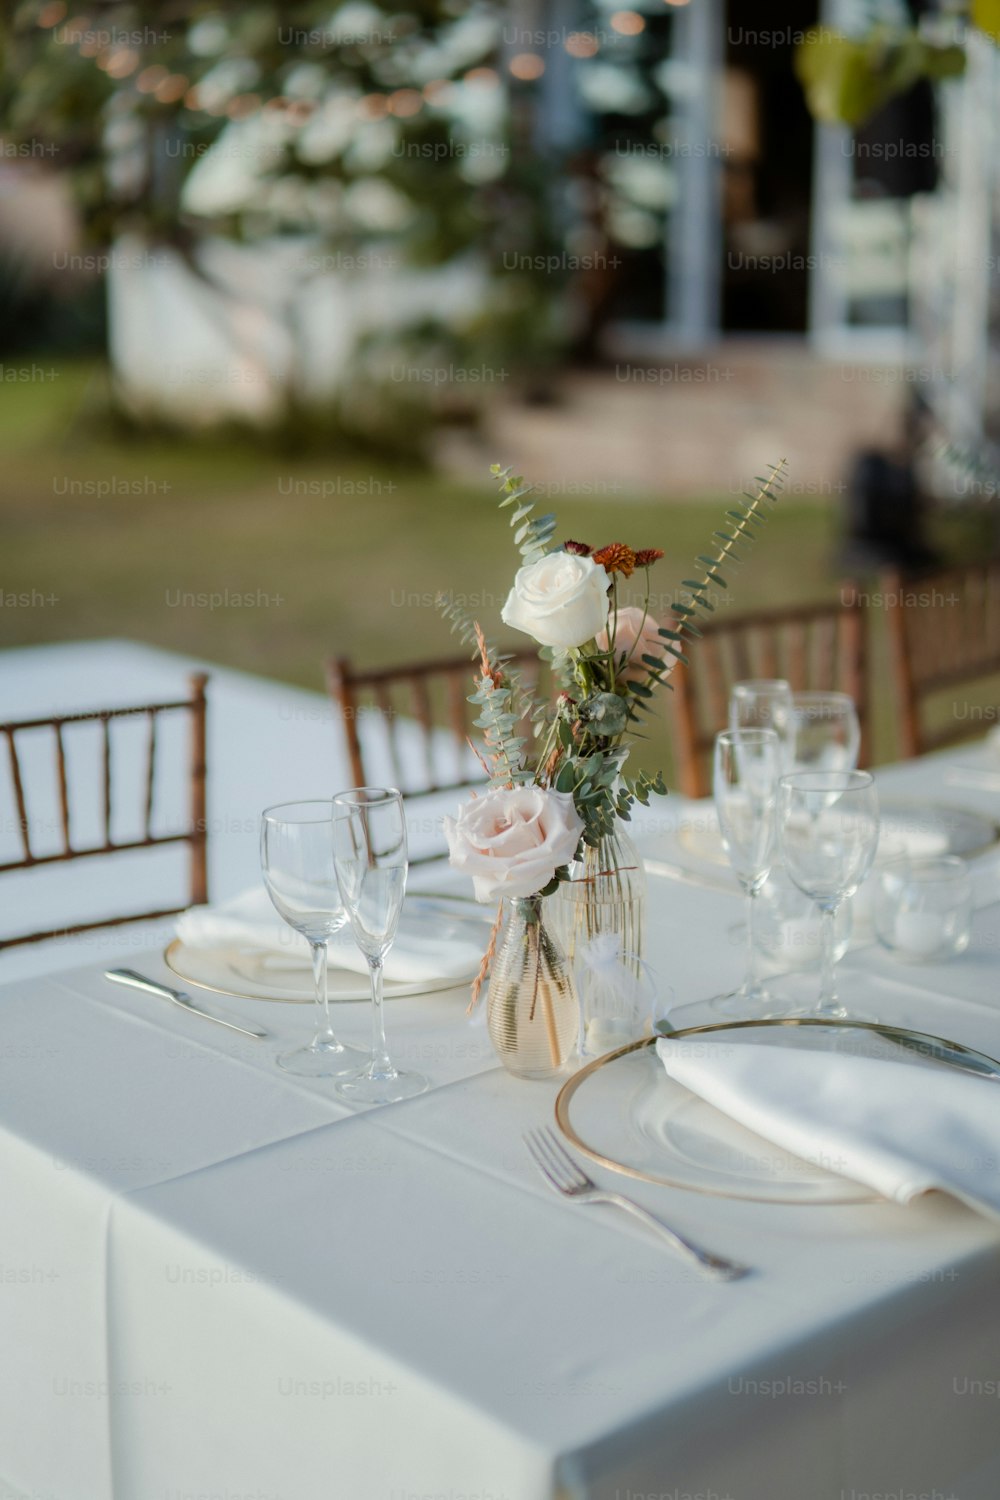 a table set for a formal dinner with flowers in a vase